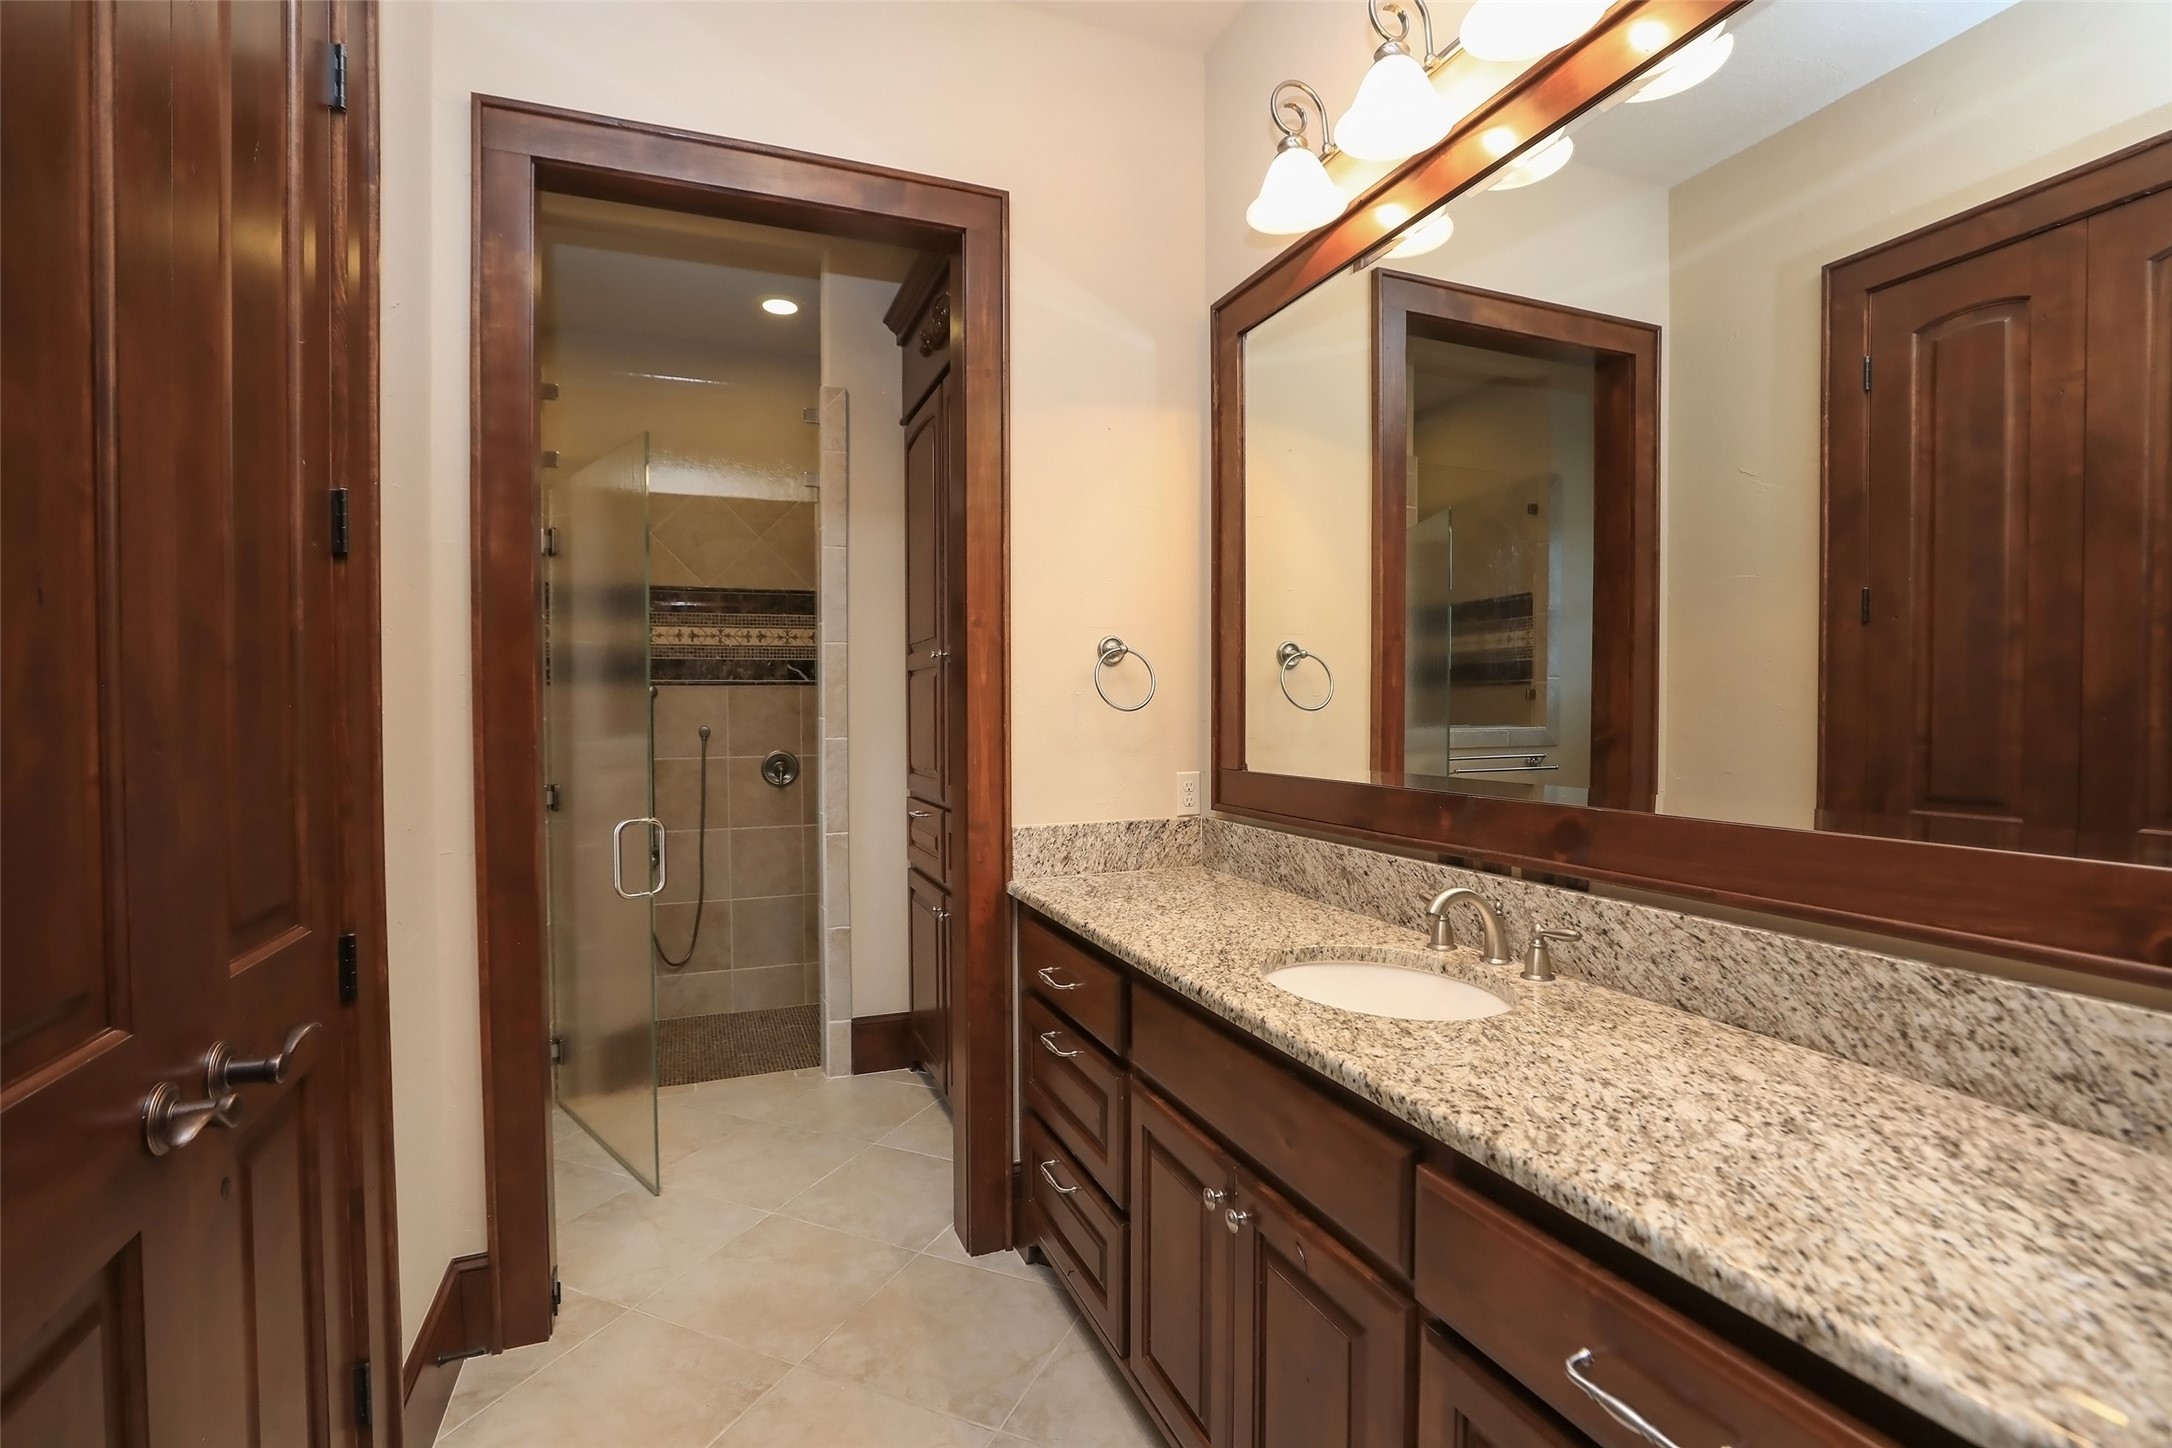 The private bathroom to the secondary bedroom has plenty of granite counter space, a walk in shower, and custom framed mirror. The doors and the cabinets throughout the house are Knotty Alder.